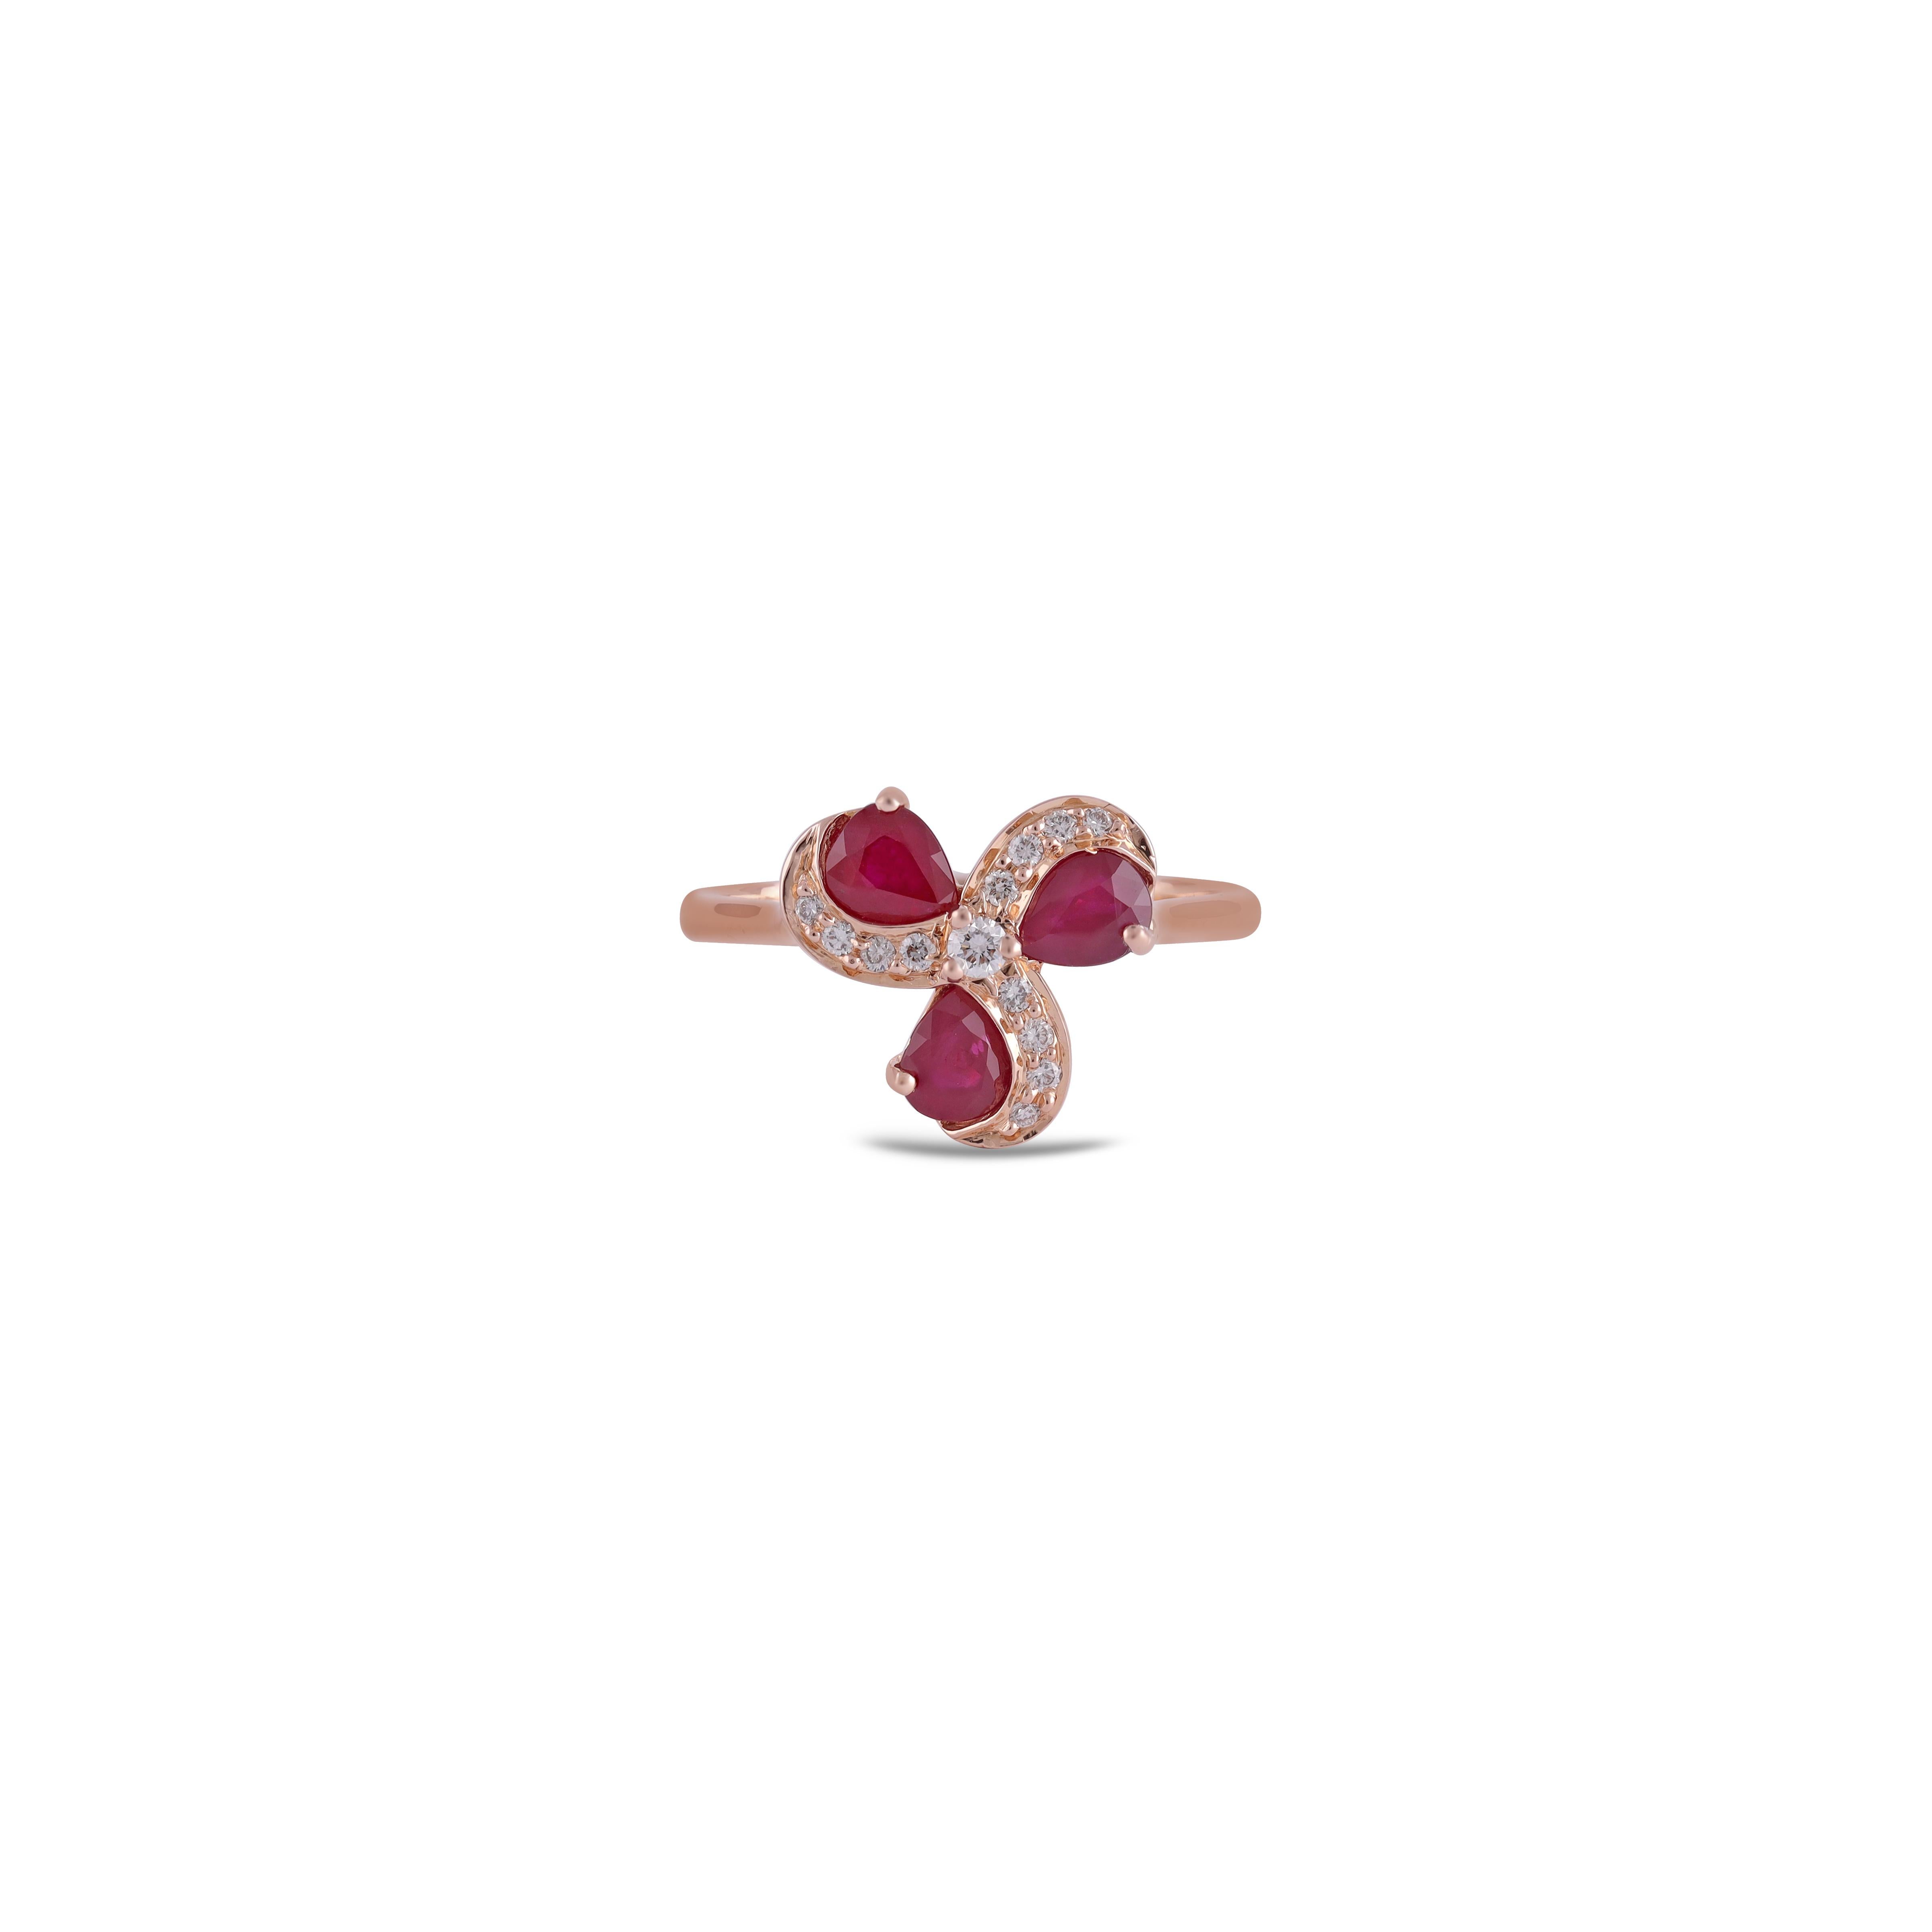 Apart of our carefully curated collection, this ring proudly displays a 1.14 carat Burma ruby crowning a 18k Rose Gold Half band. The ruby's prongs hold the stone tightly but allow it to be seen in its entirety. The center stone is surrounded by